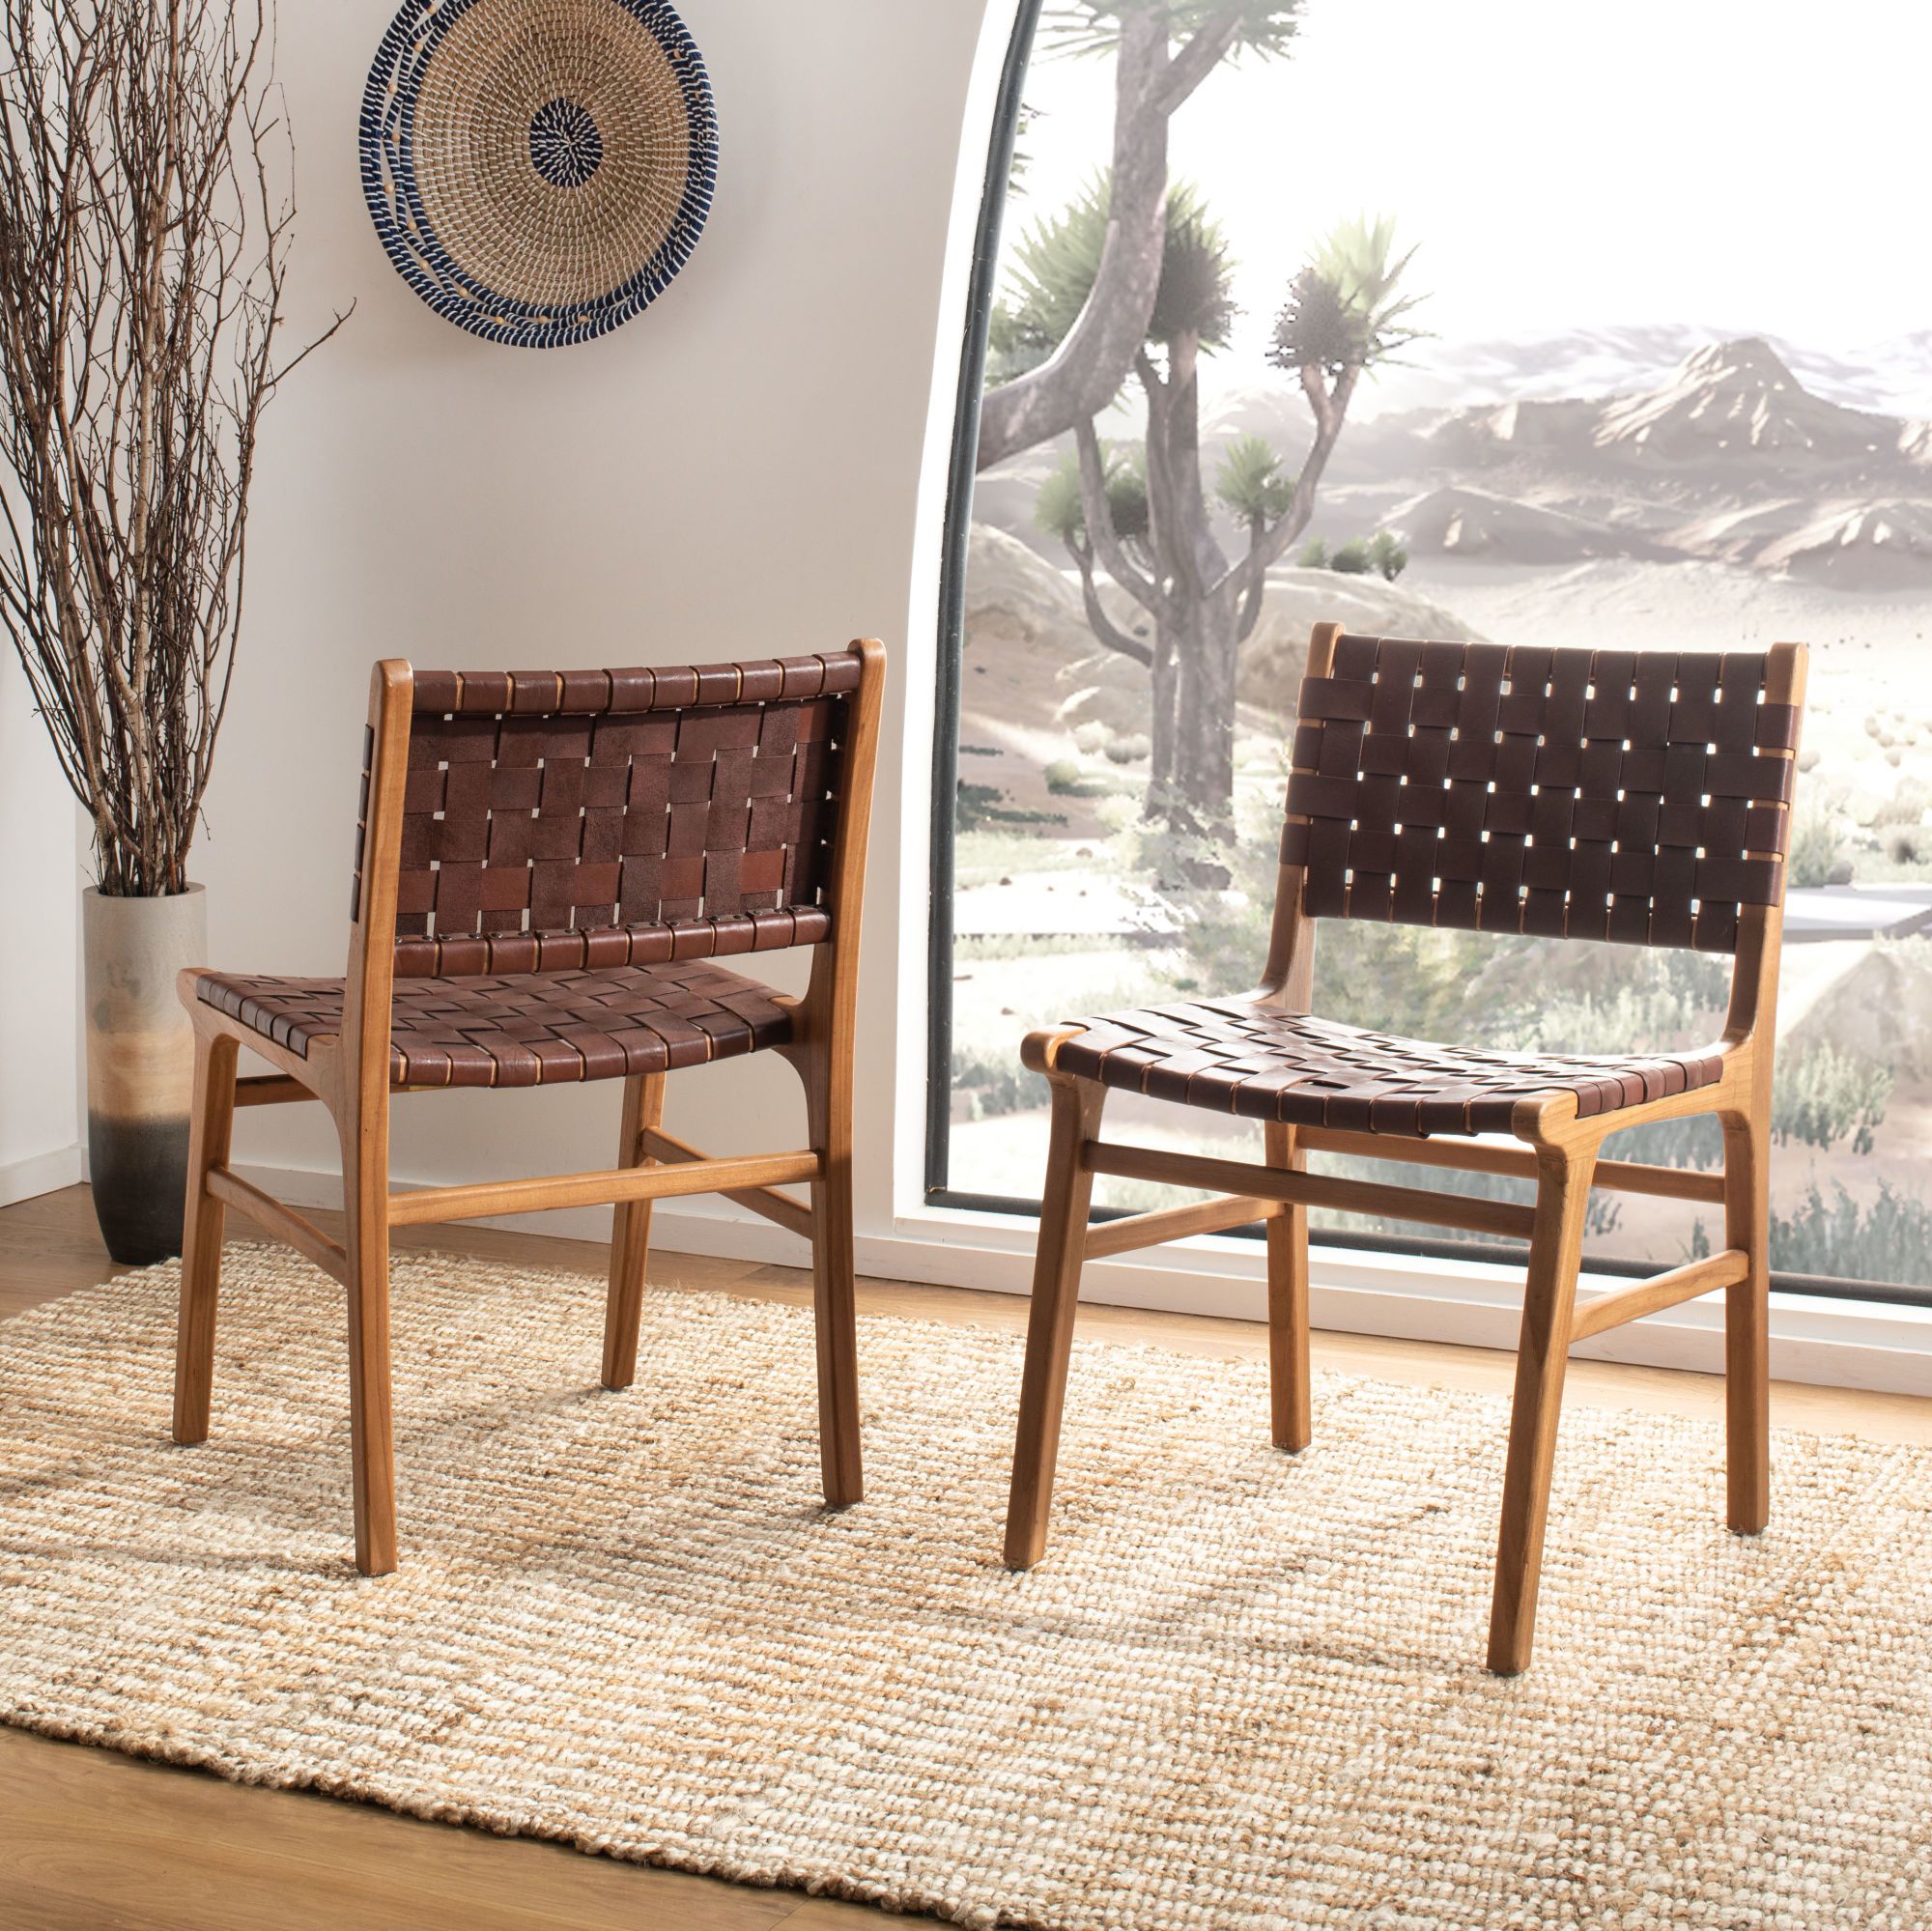 Natural Woven Modern Outdoor Chairs Sets Inside 2019 Taika Woven Leather Dining Chair 2 Set (View 2 of 15)